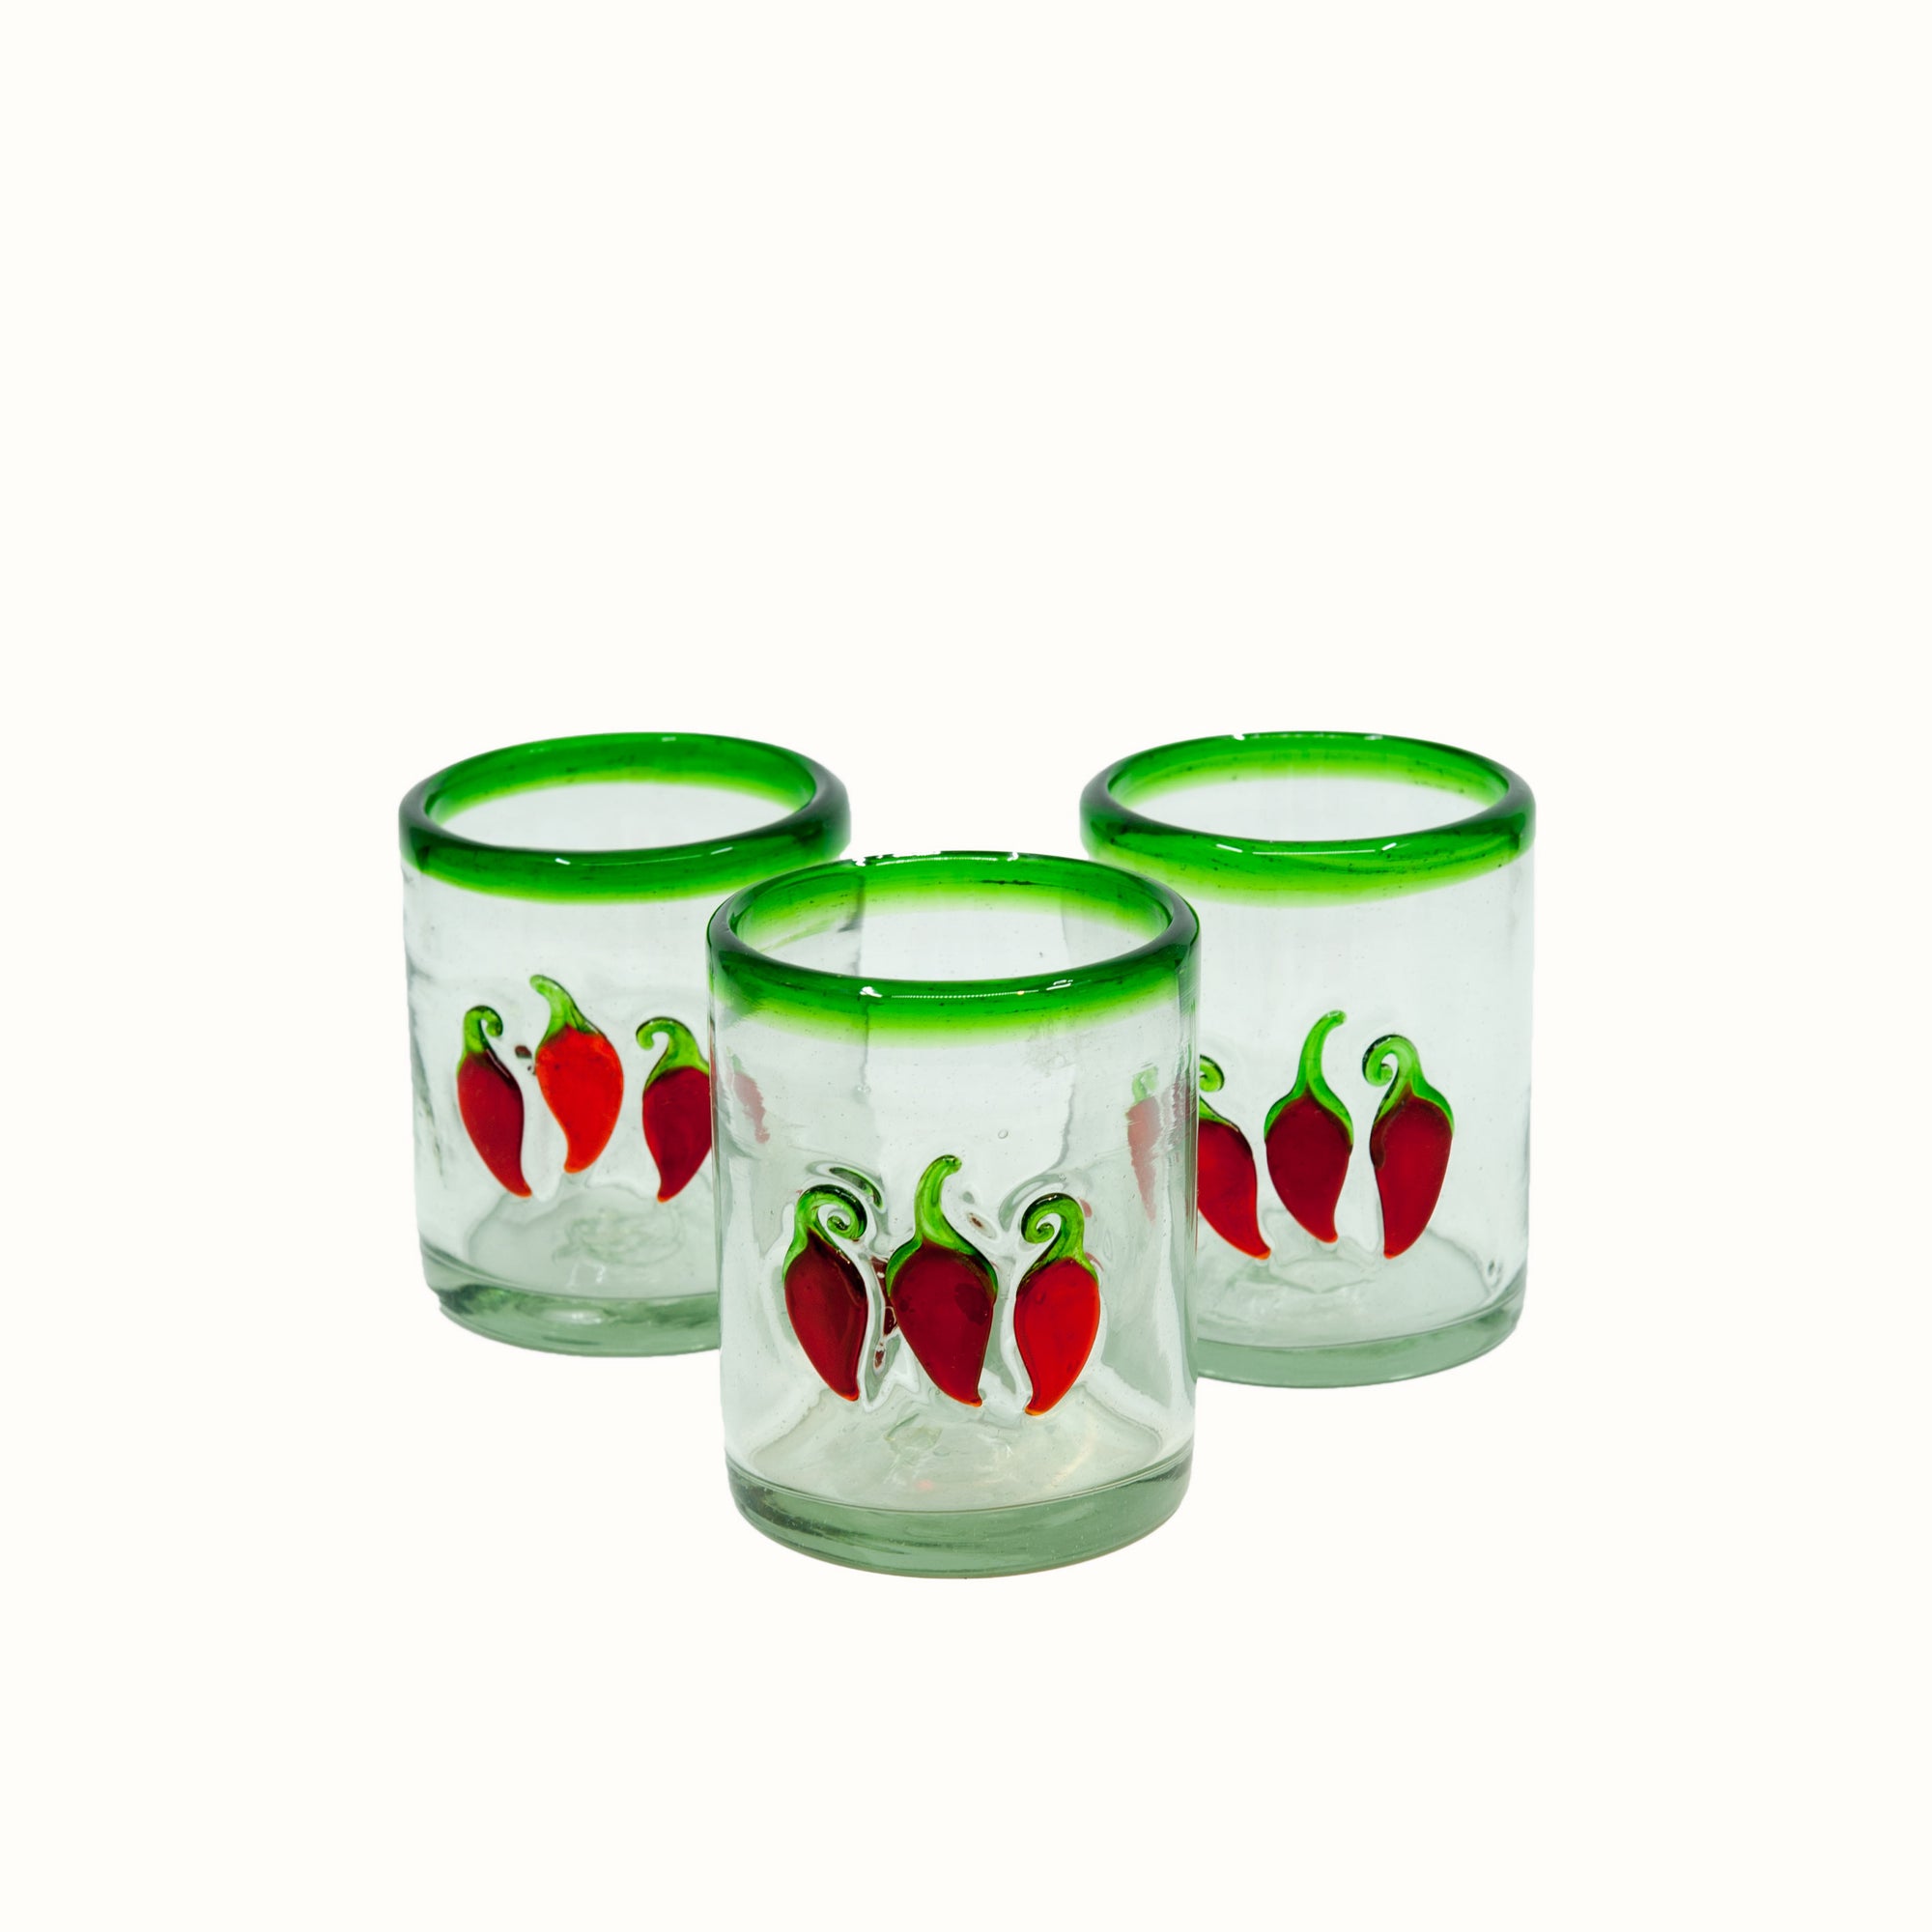 Mexican Tumbler - Green Rim, Red Chillies - 4"